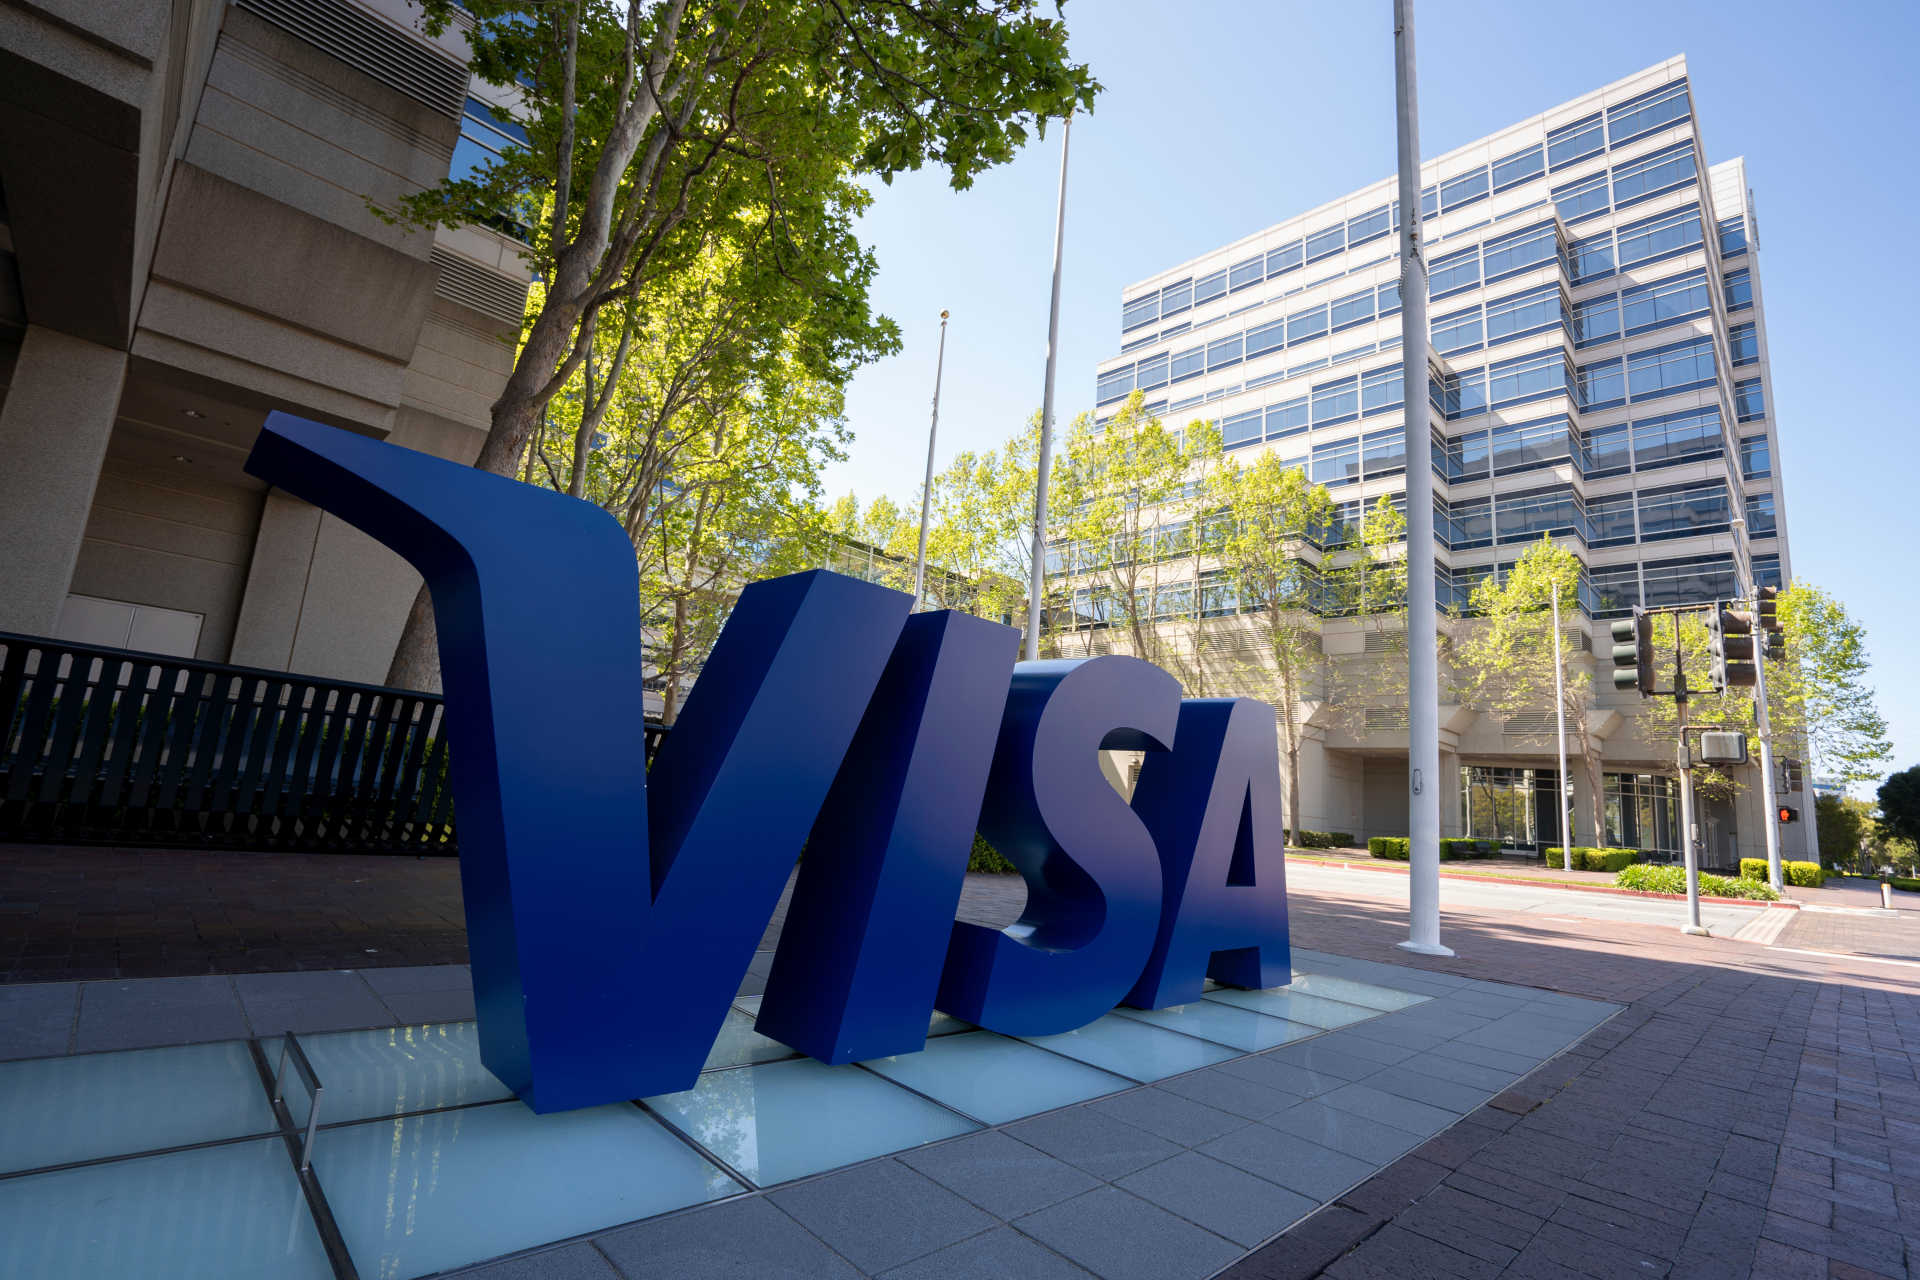 Is payments giant Visa secretly collaborating with Ripple?
